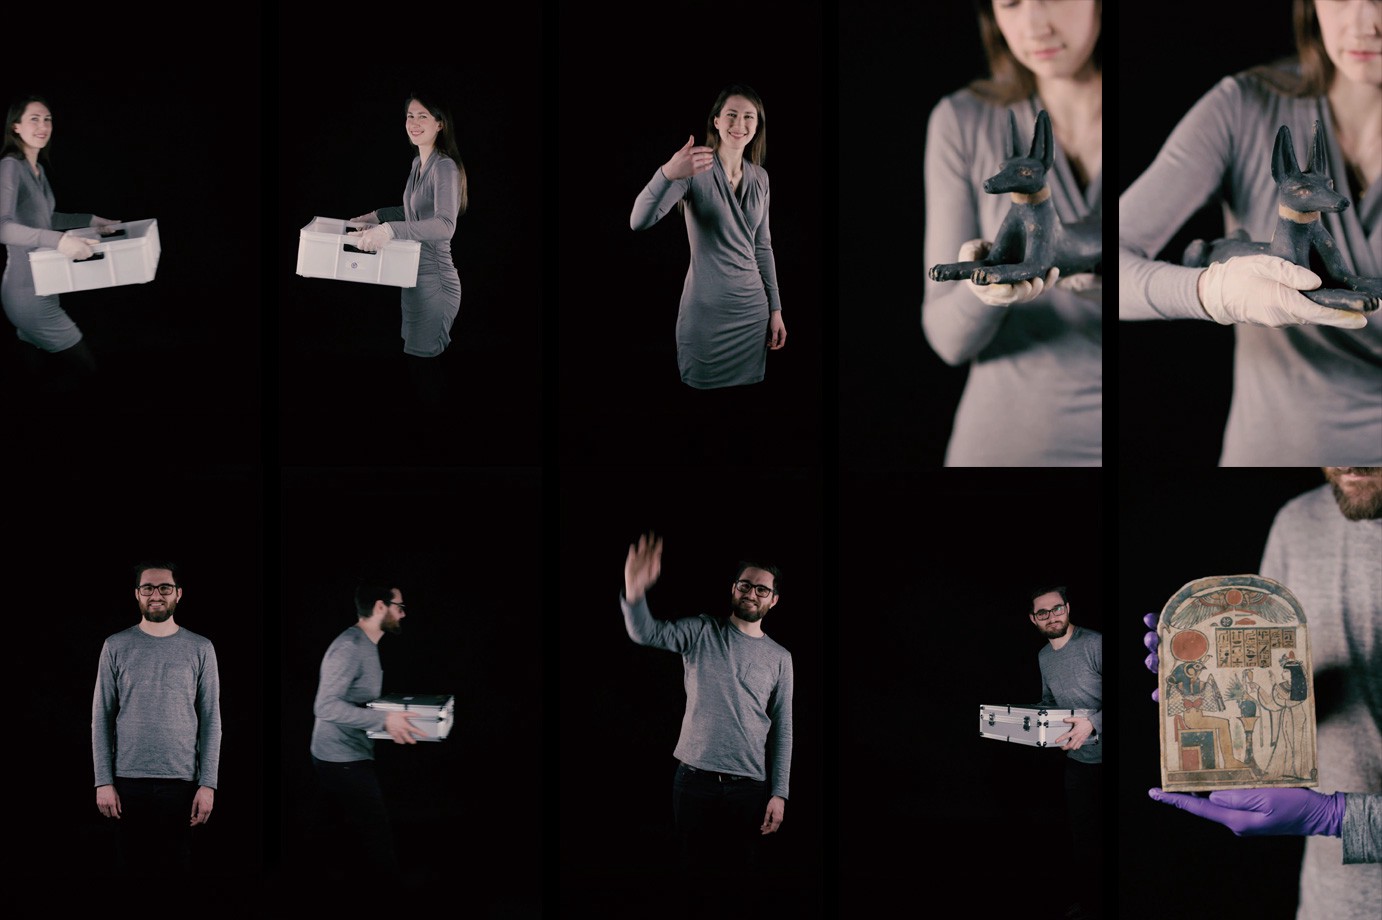 The video sequences displayed on the kiosk, from “attractor” scene to thank you “reveal”